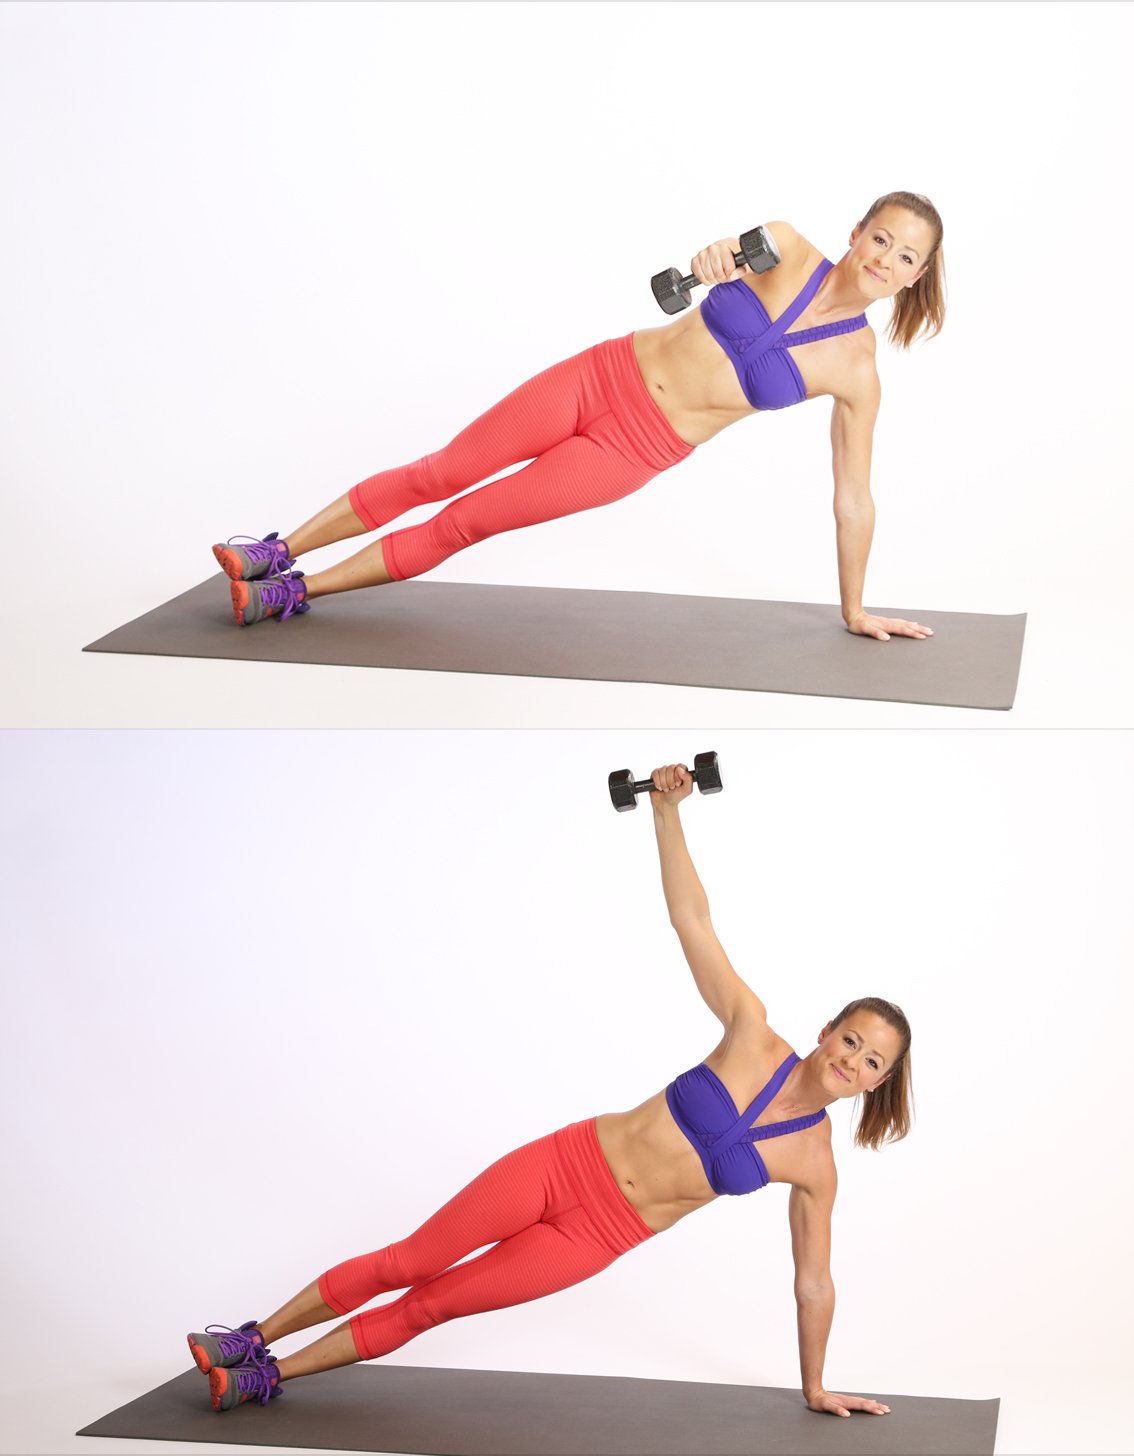 This Move Will Do Serious Work on Your Abs